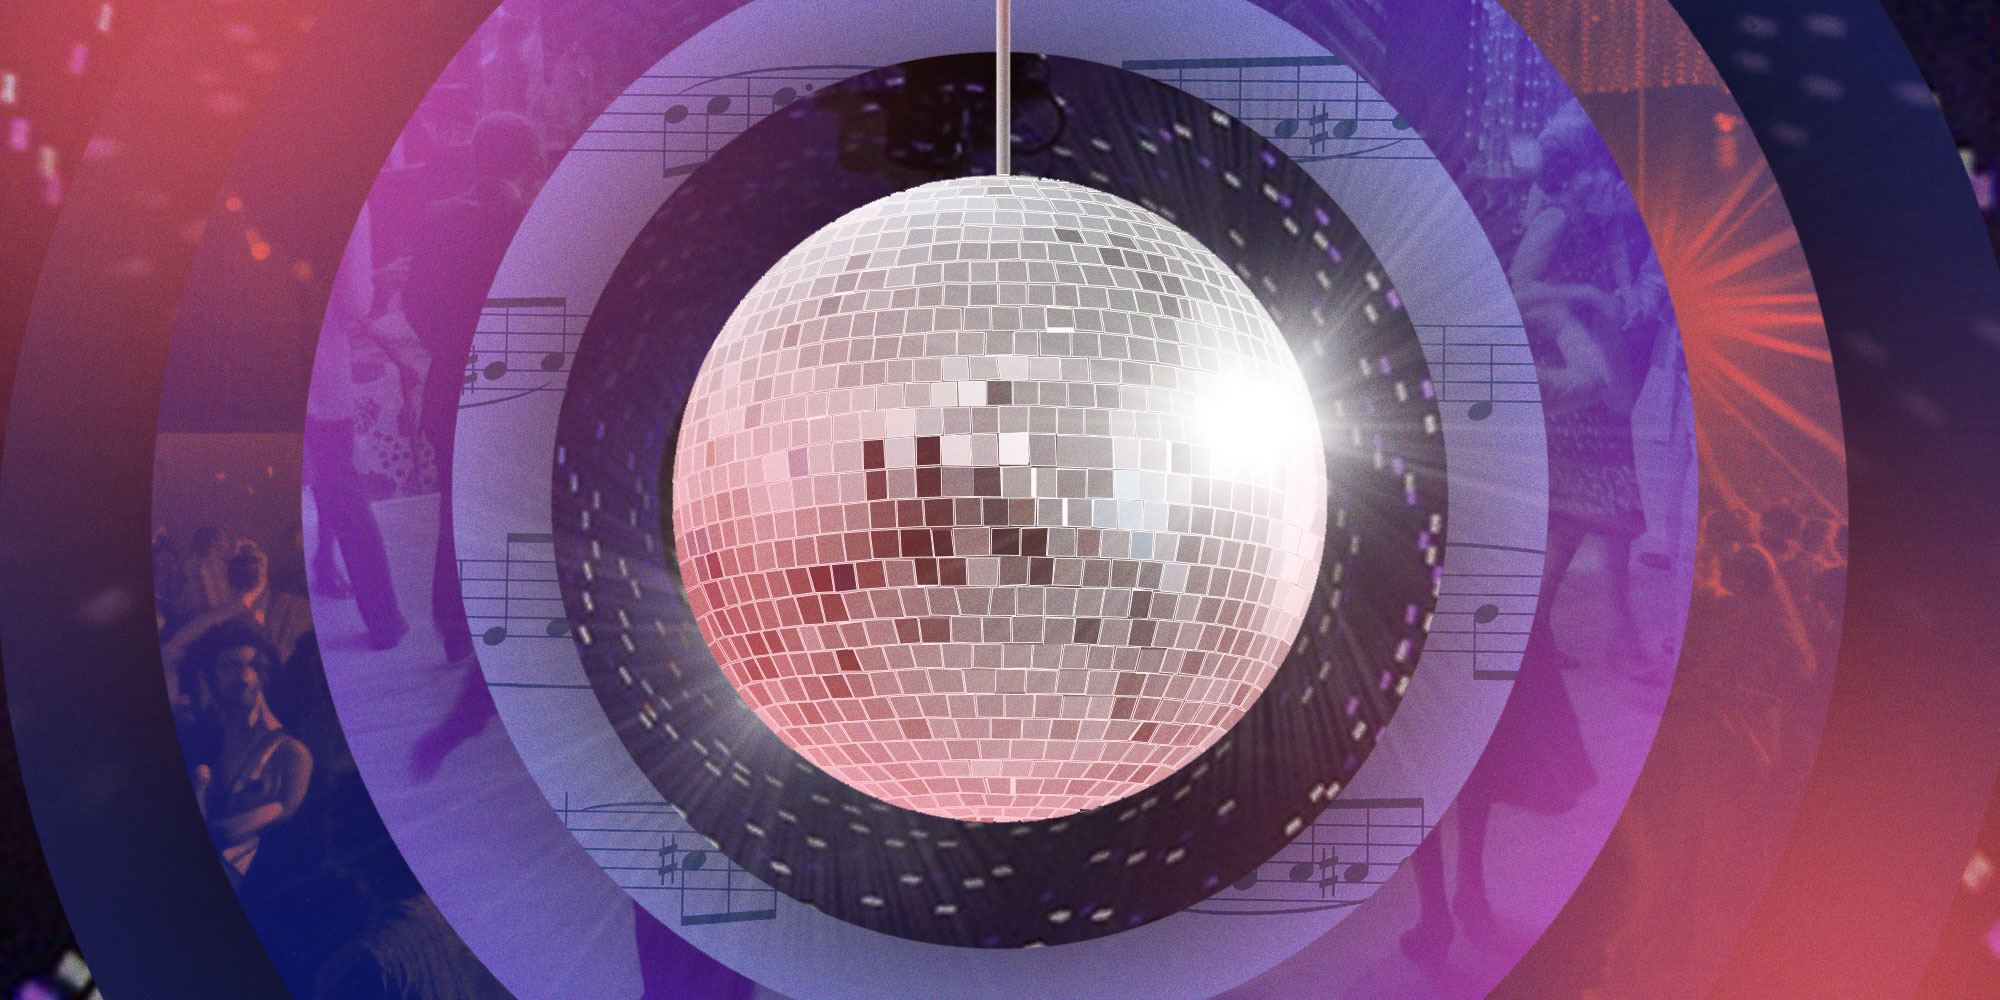 pink disco ball - Google Images  Disco ball, Everything pink